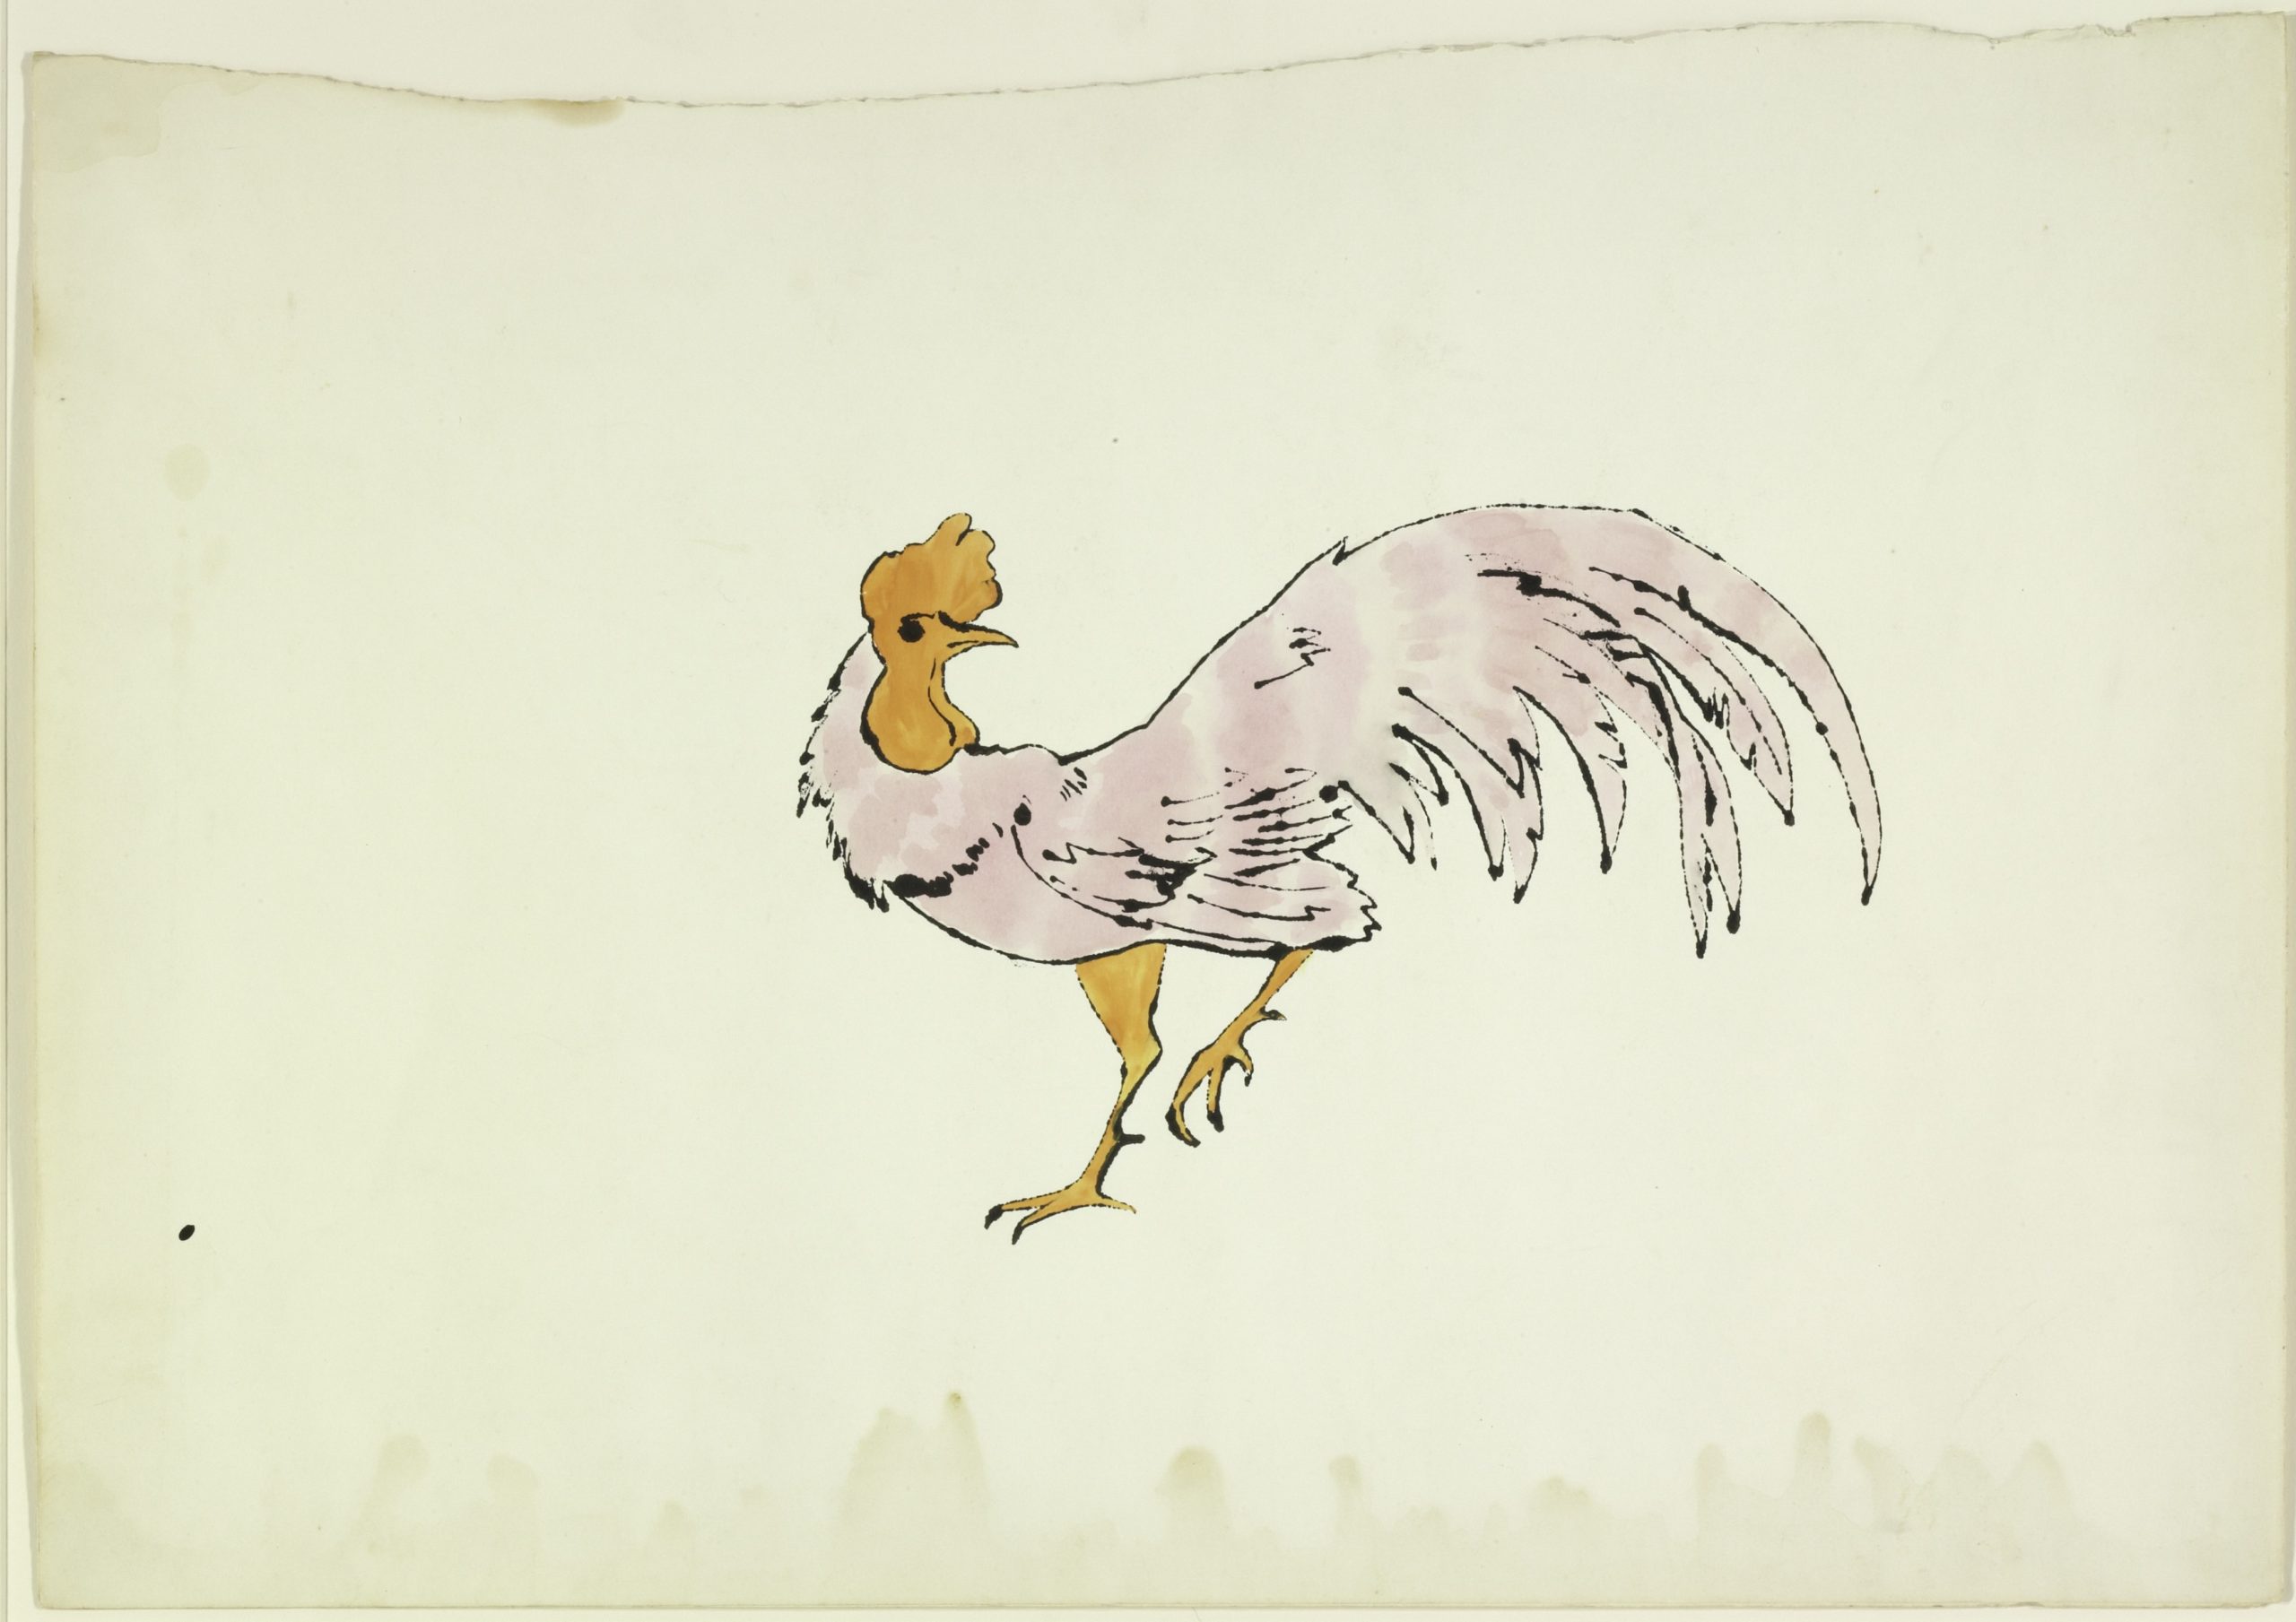 Andy Warhol, Rooster, ca. 1957, watercolor and ink on paper